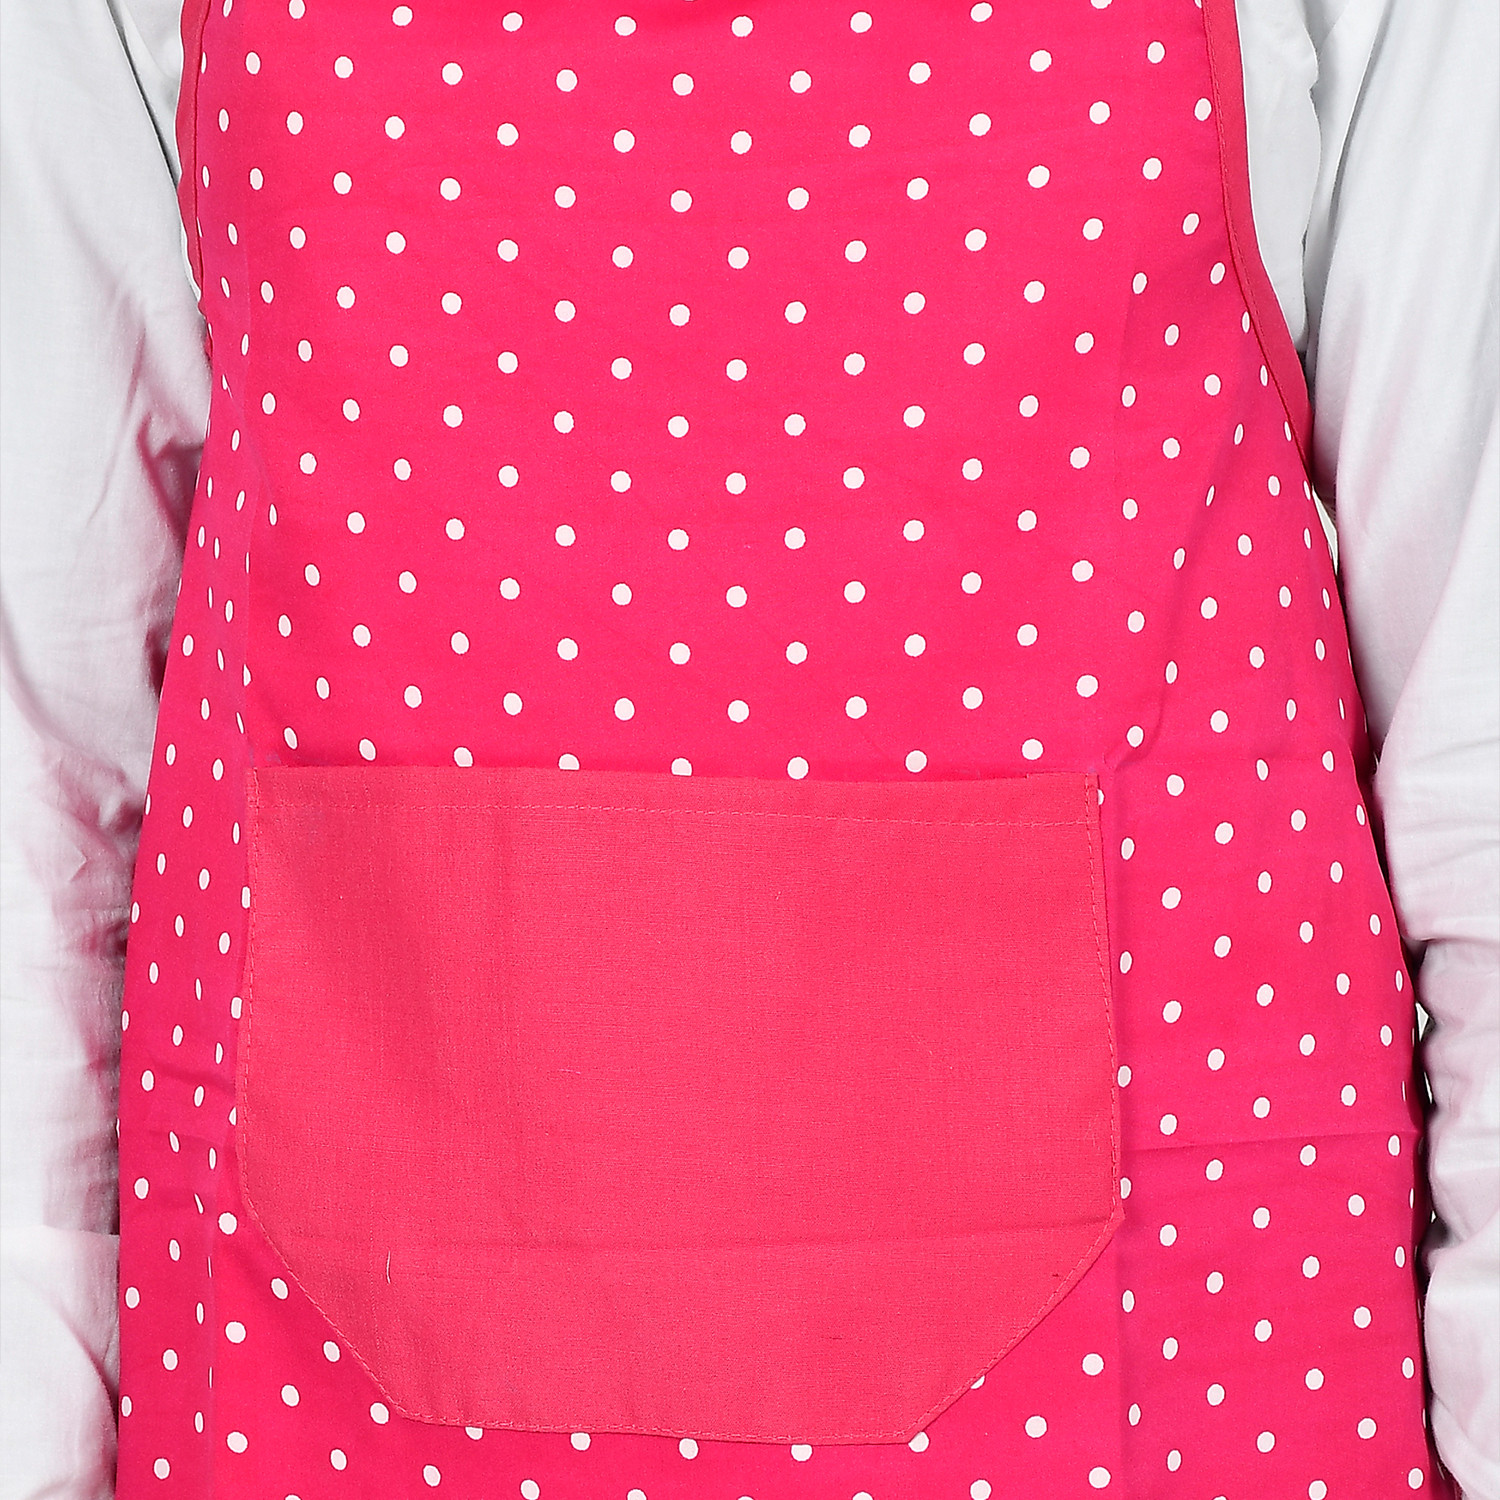 Kuber Industries Dot Printed Apron with 1 Front Pocket (Pink)